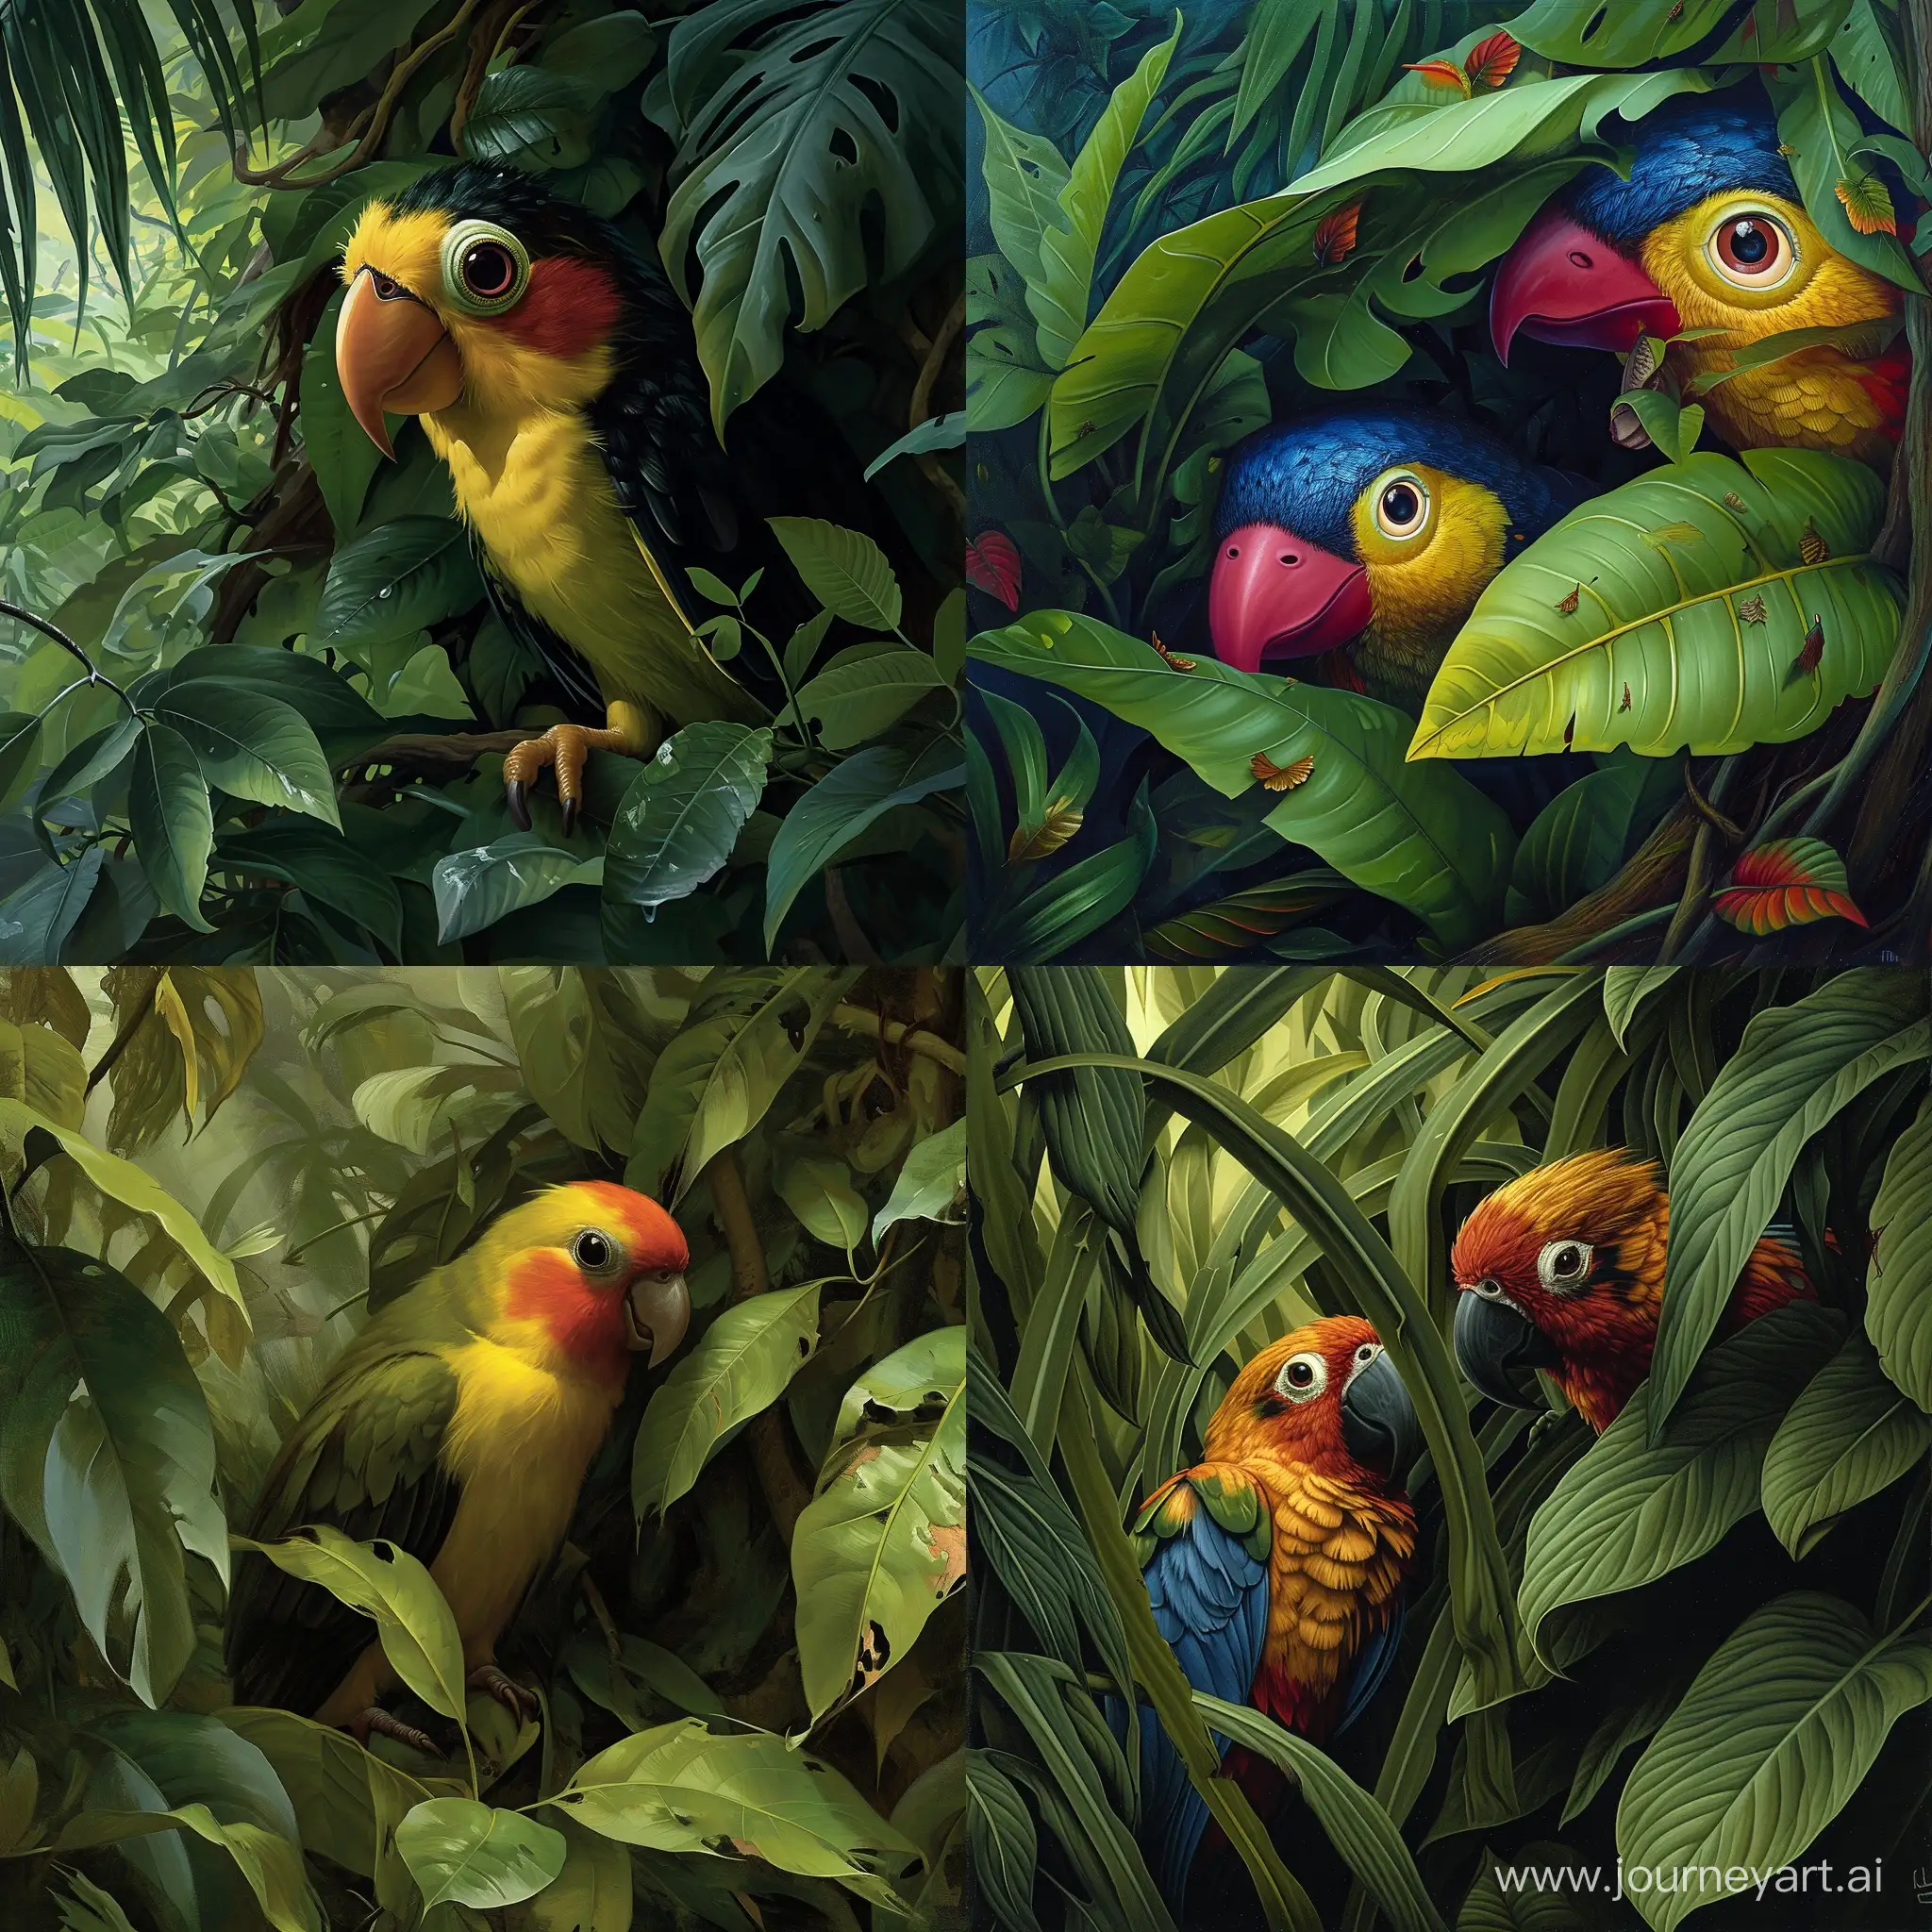 Vibrant-Tropical-Birds-Concealed-Among-Jungle-Leaves